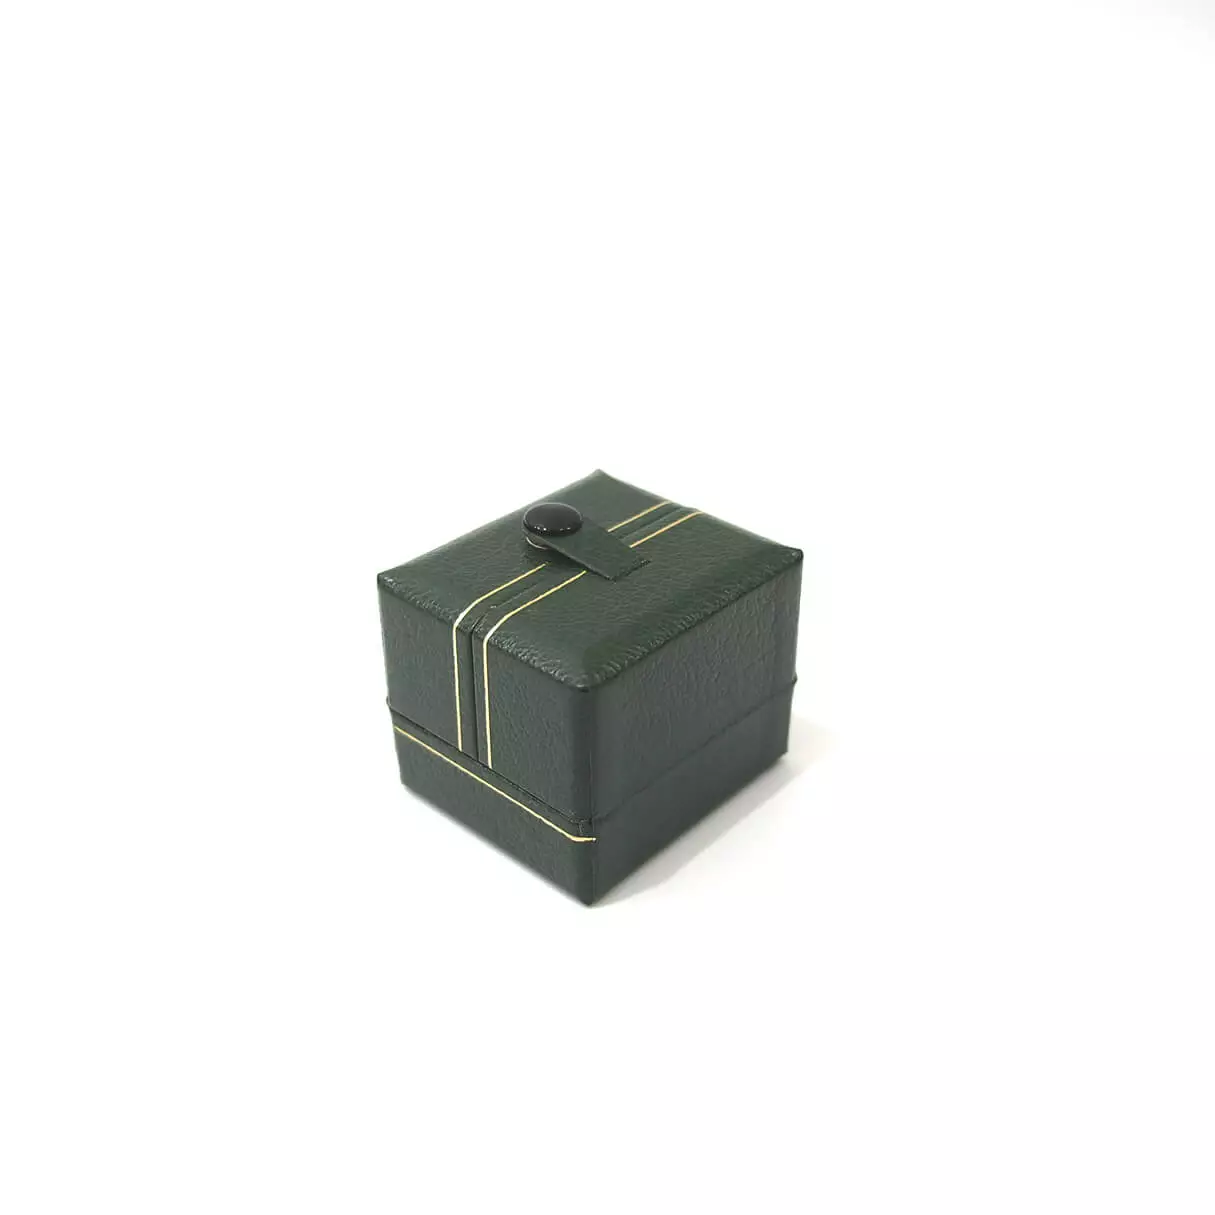 valentina ring box in green one ring slot side view